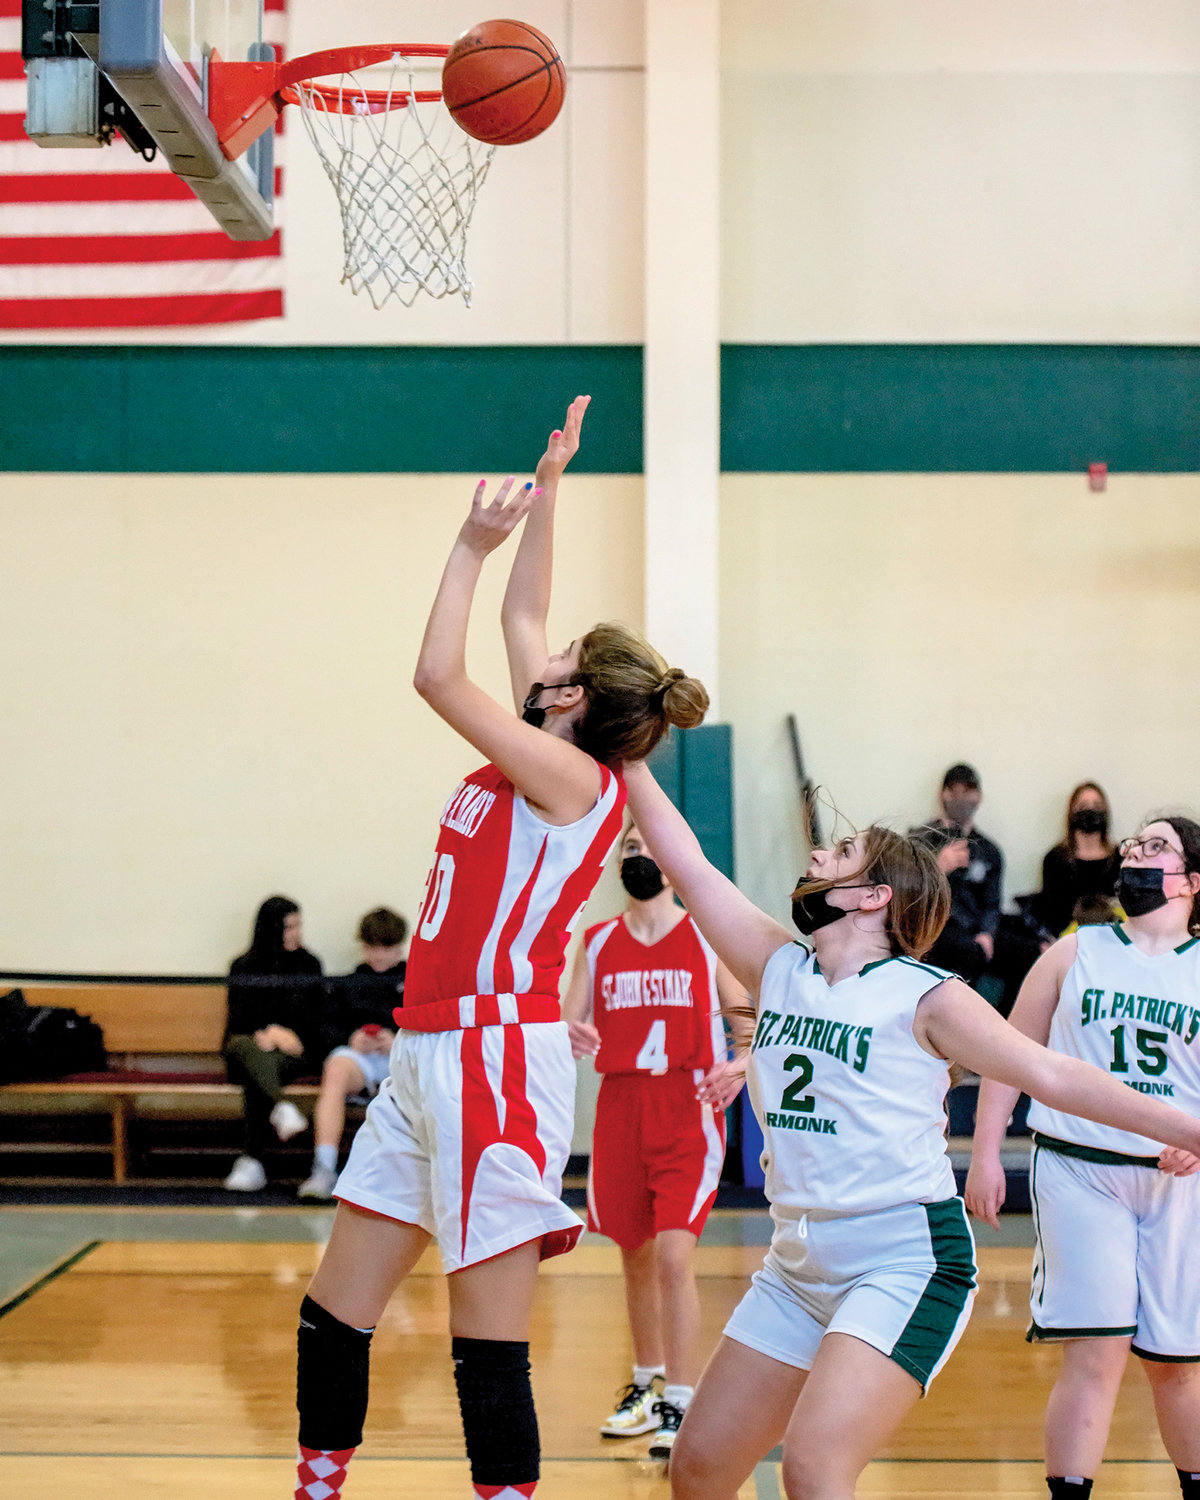 Savanna Pavlounis of St. John and St. Mary shoots the ball as St. Patrick’s Valentina Lumaj defends in the CYO eighth-grade girls game.